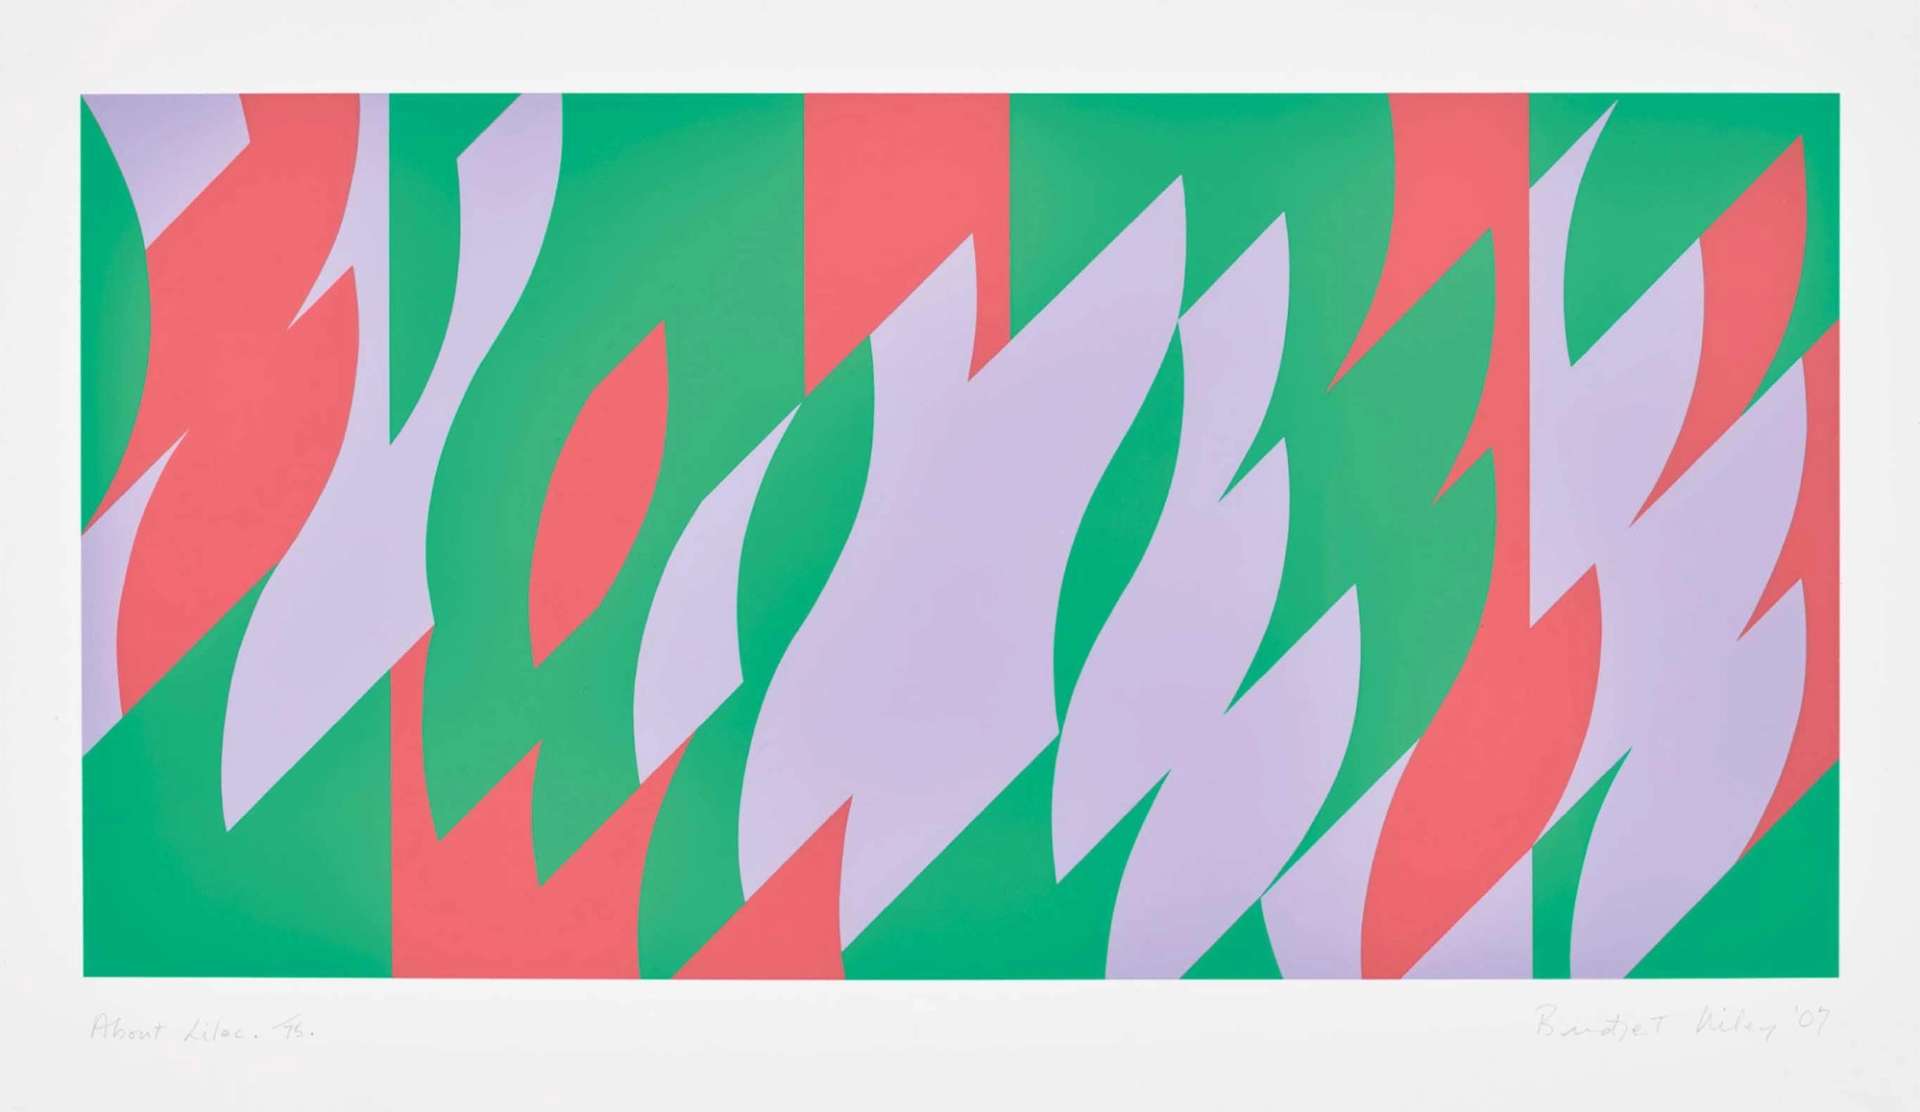 About Lilac by Bridget Riley